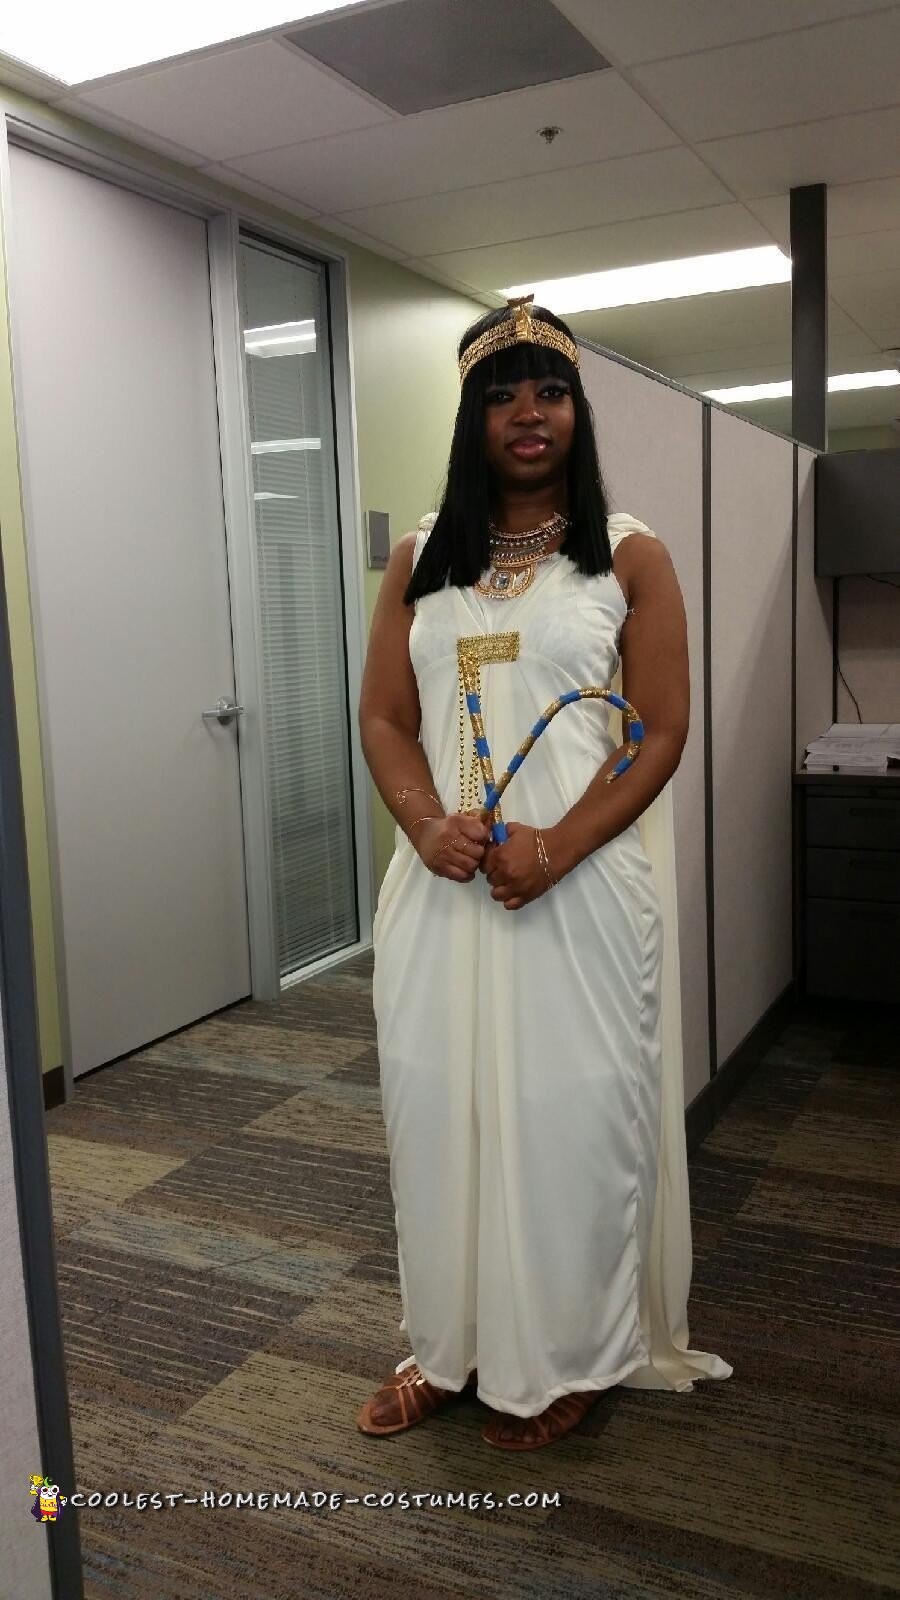 Cleopatra Costume: Epitome of Egyptian Royalty